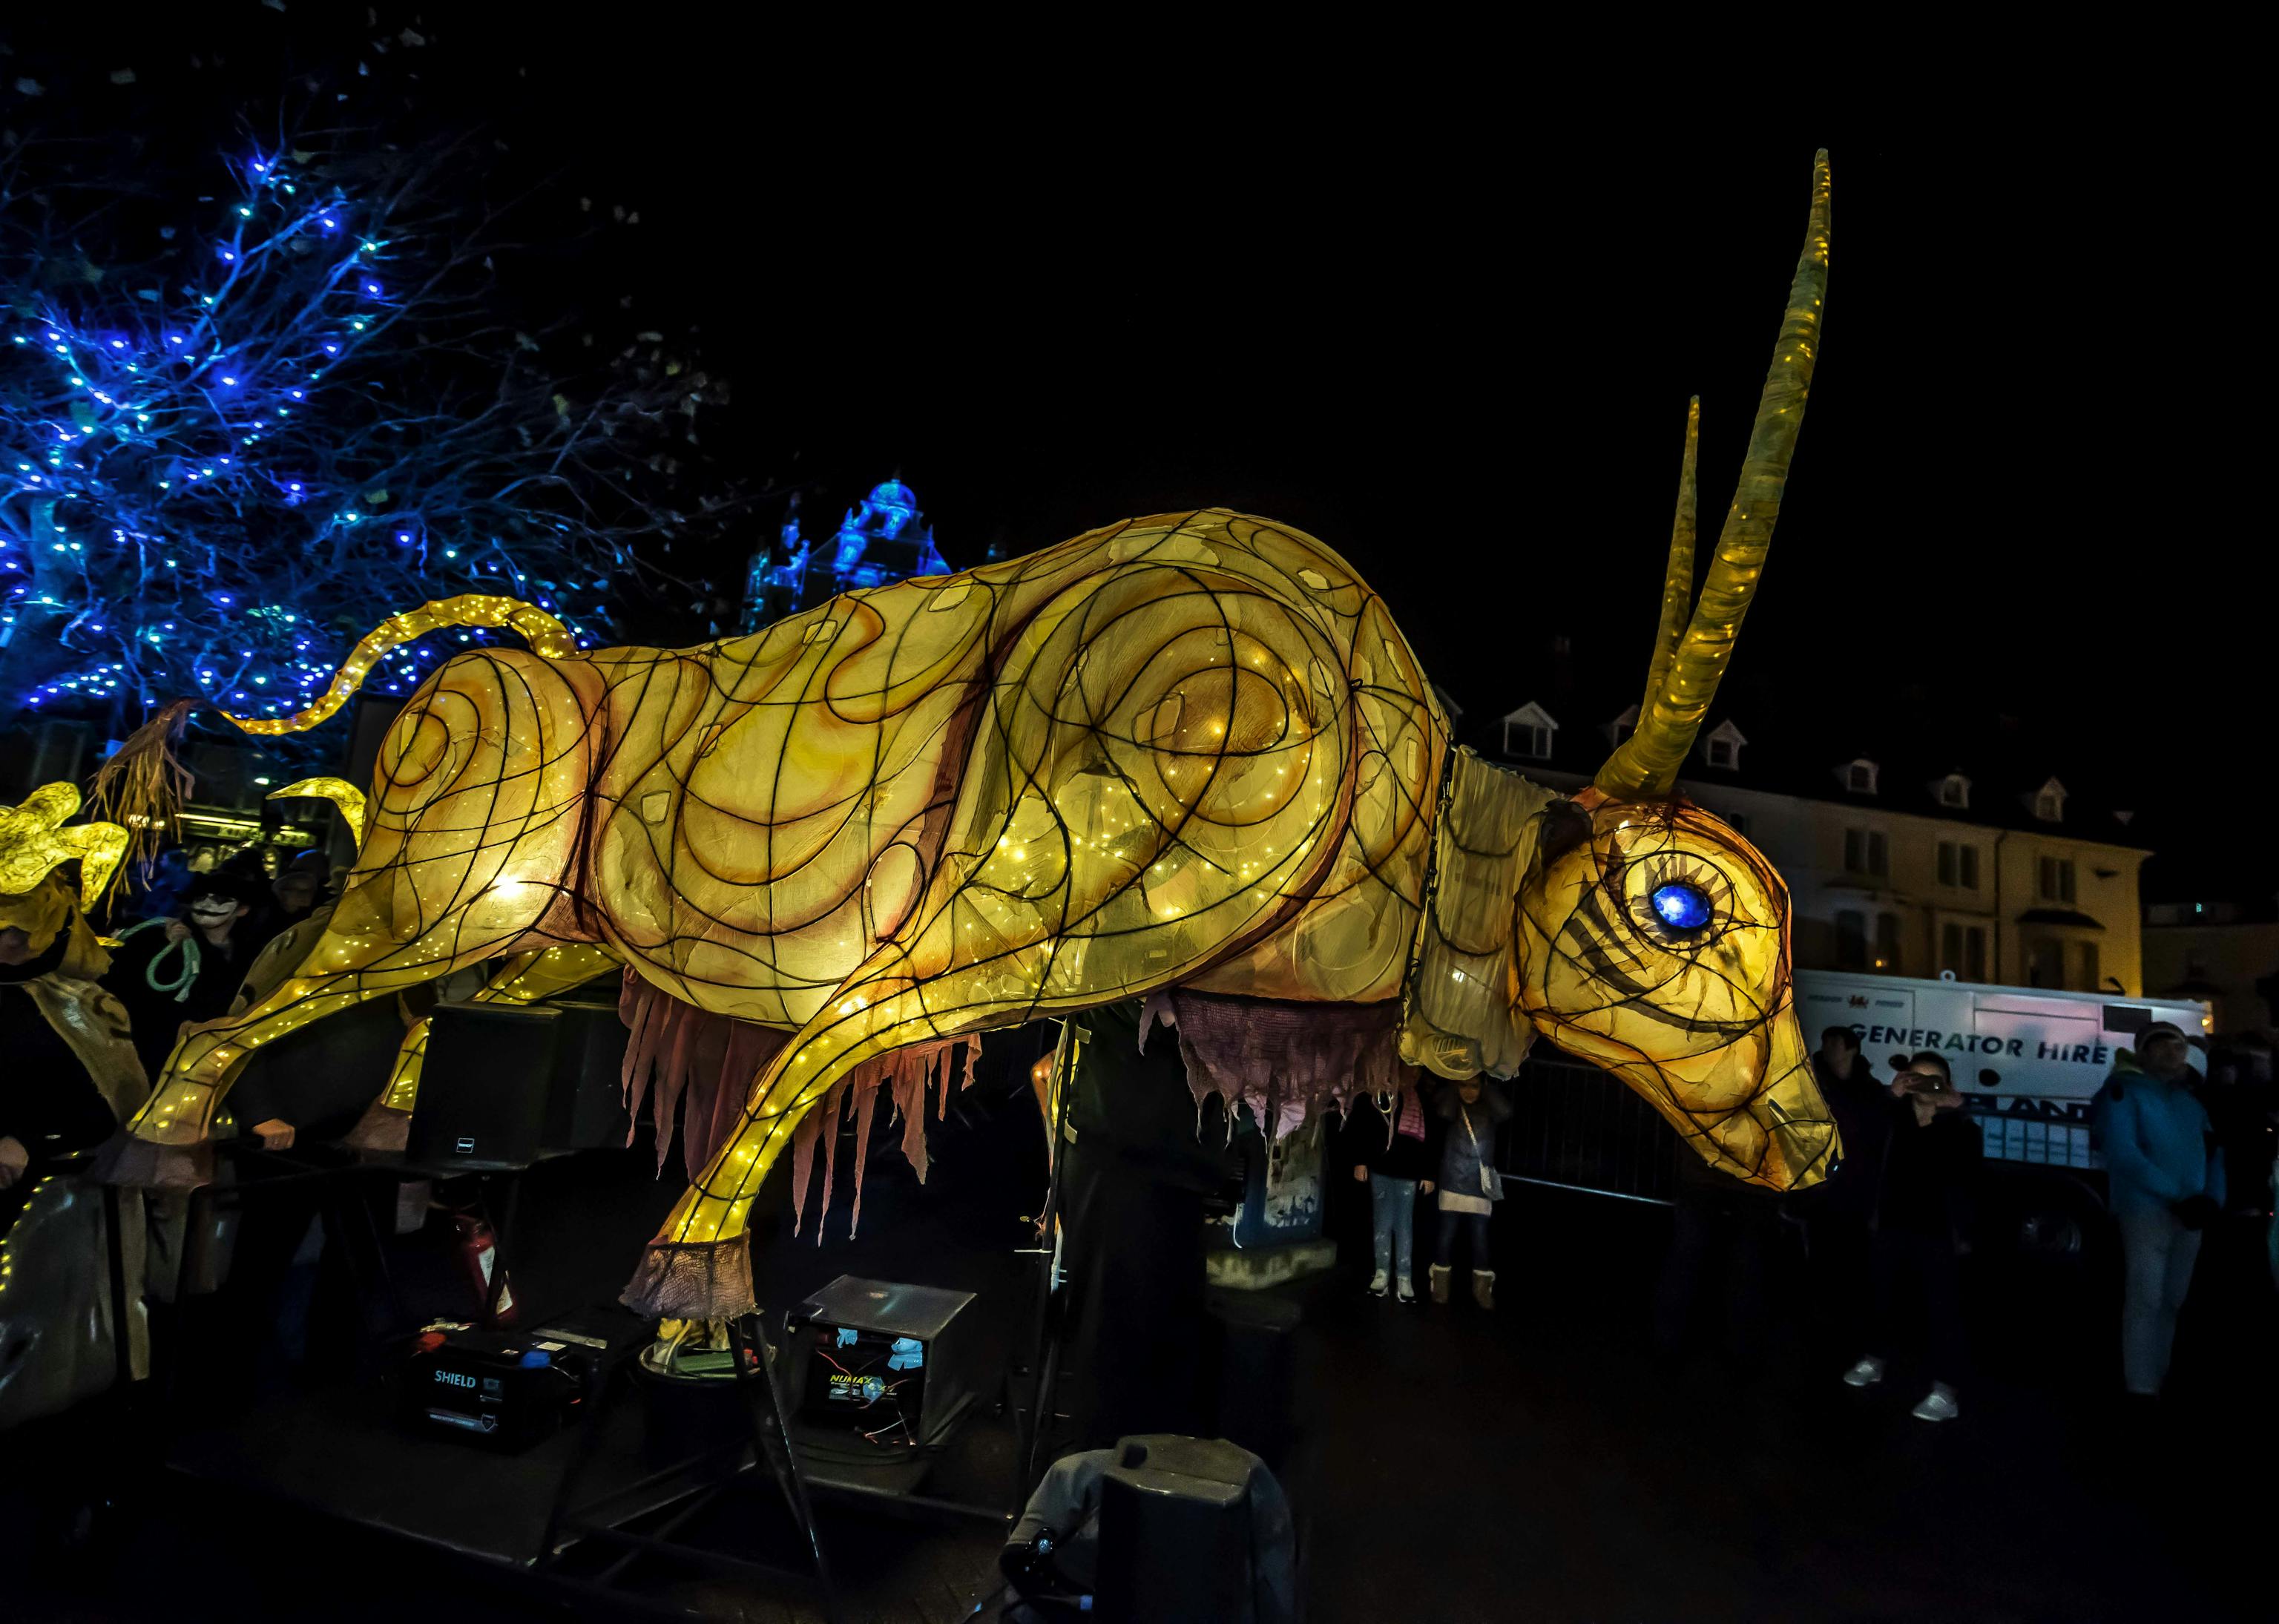 A large ox lit from within parading through a street